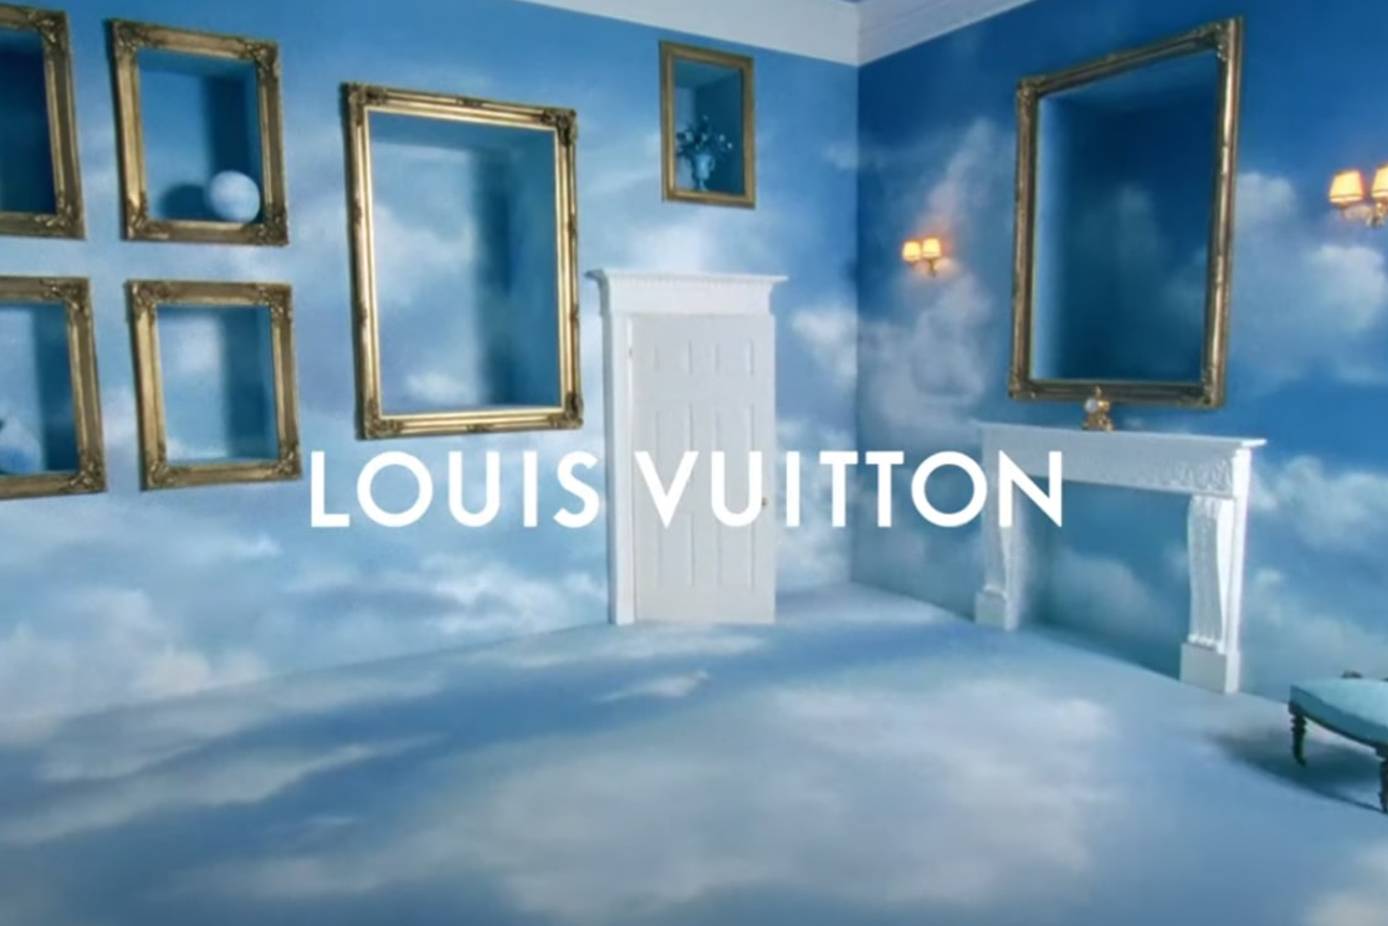 Louis Vuitton Heaven on Earth FW20 Campaign